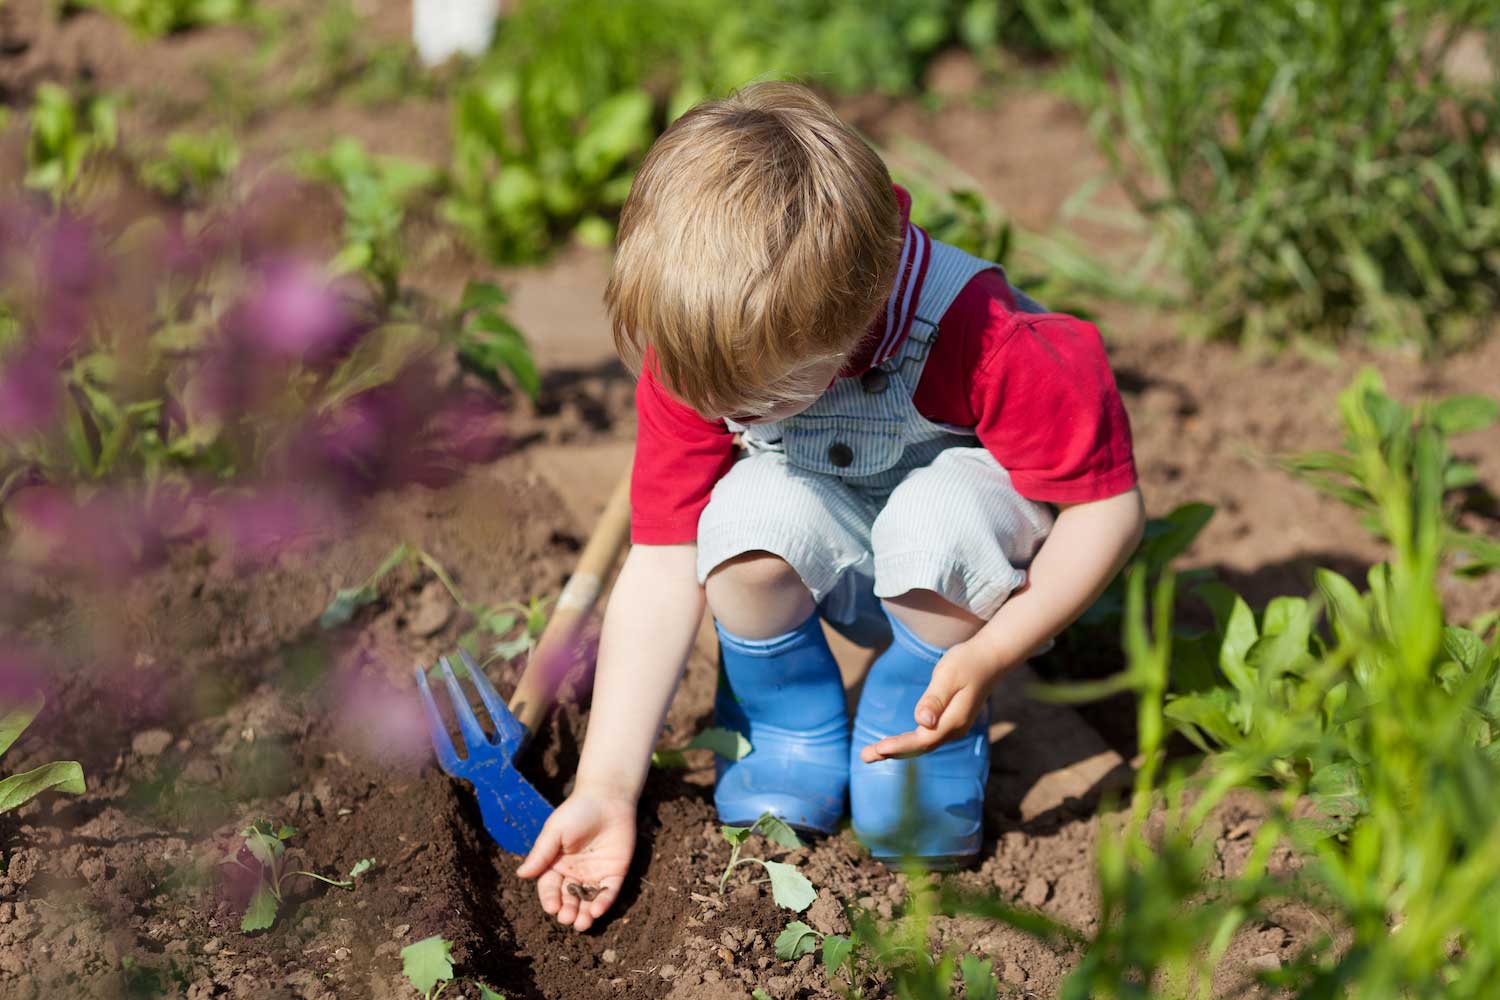 A young child planting seeds in the soil.